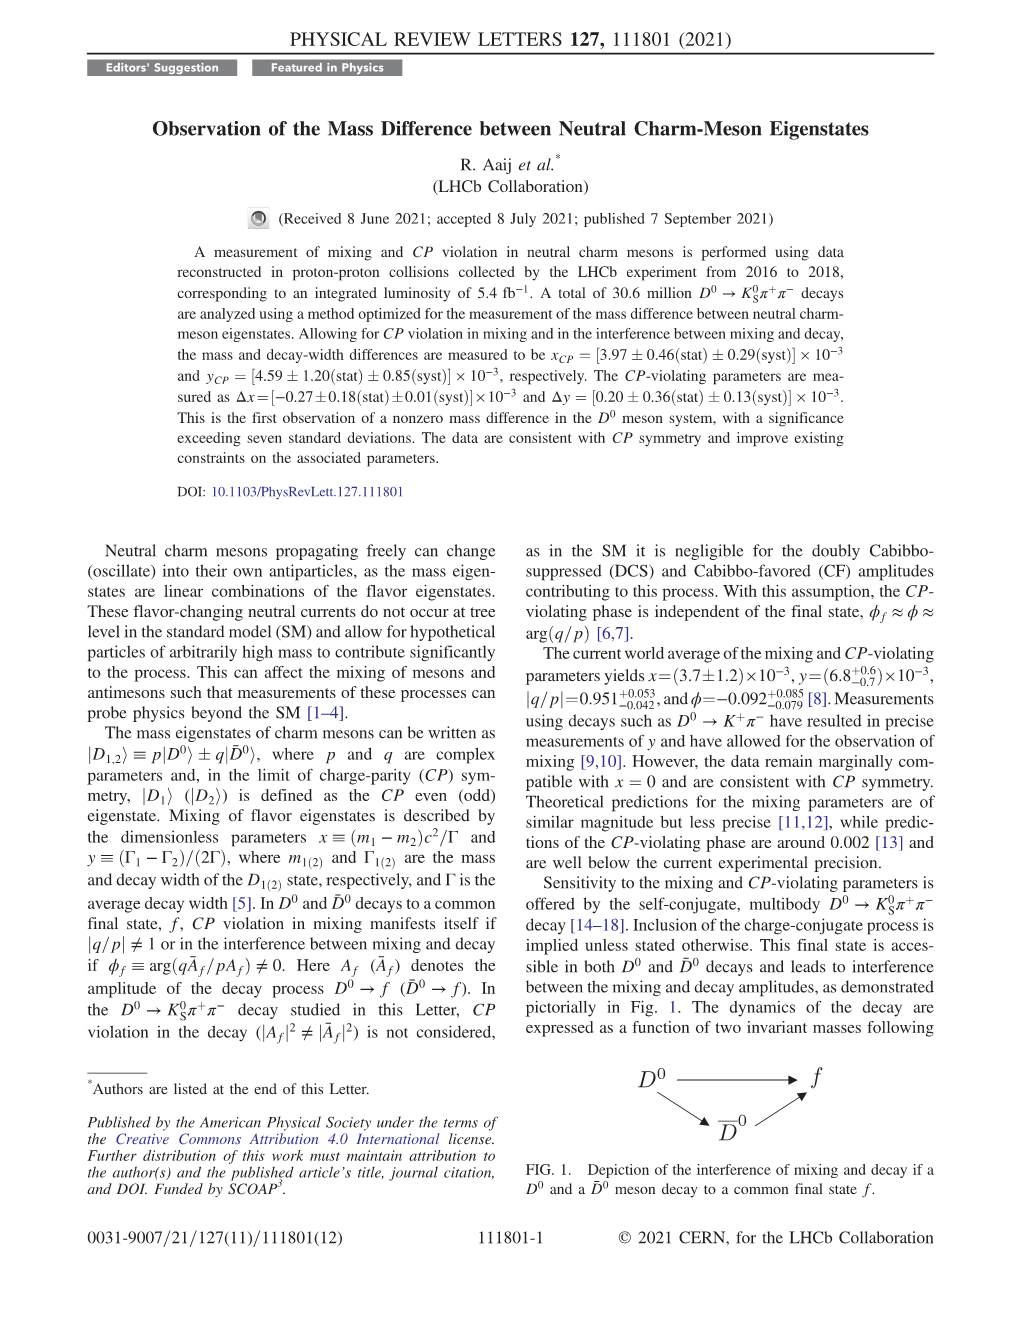 Observation of the Mass Difference Between Neutral Charm-Meson Eigenstates R